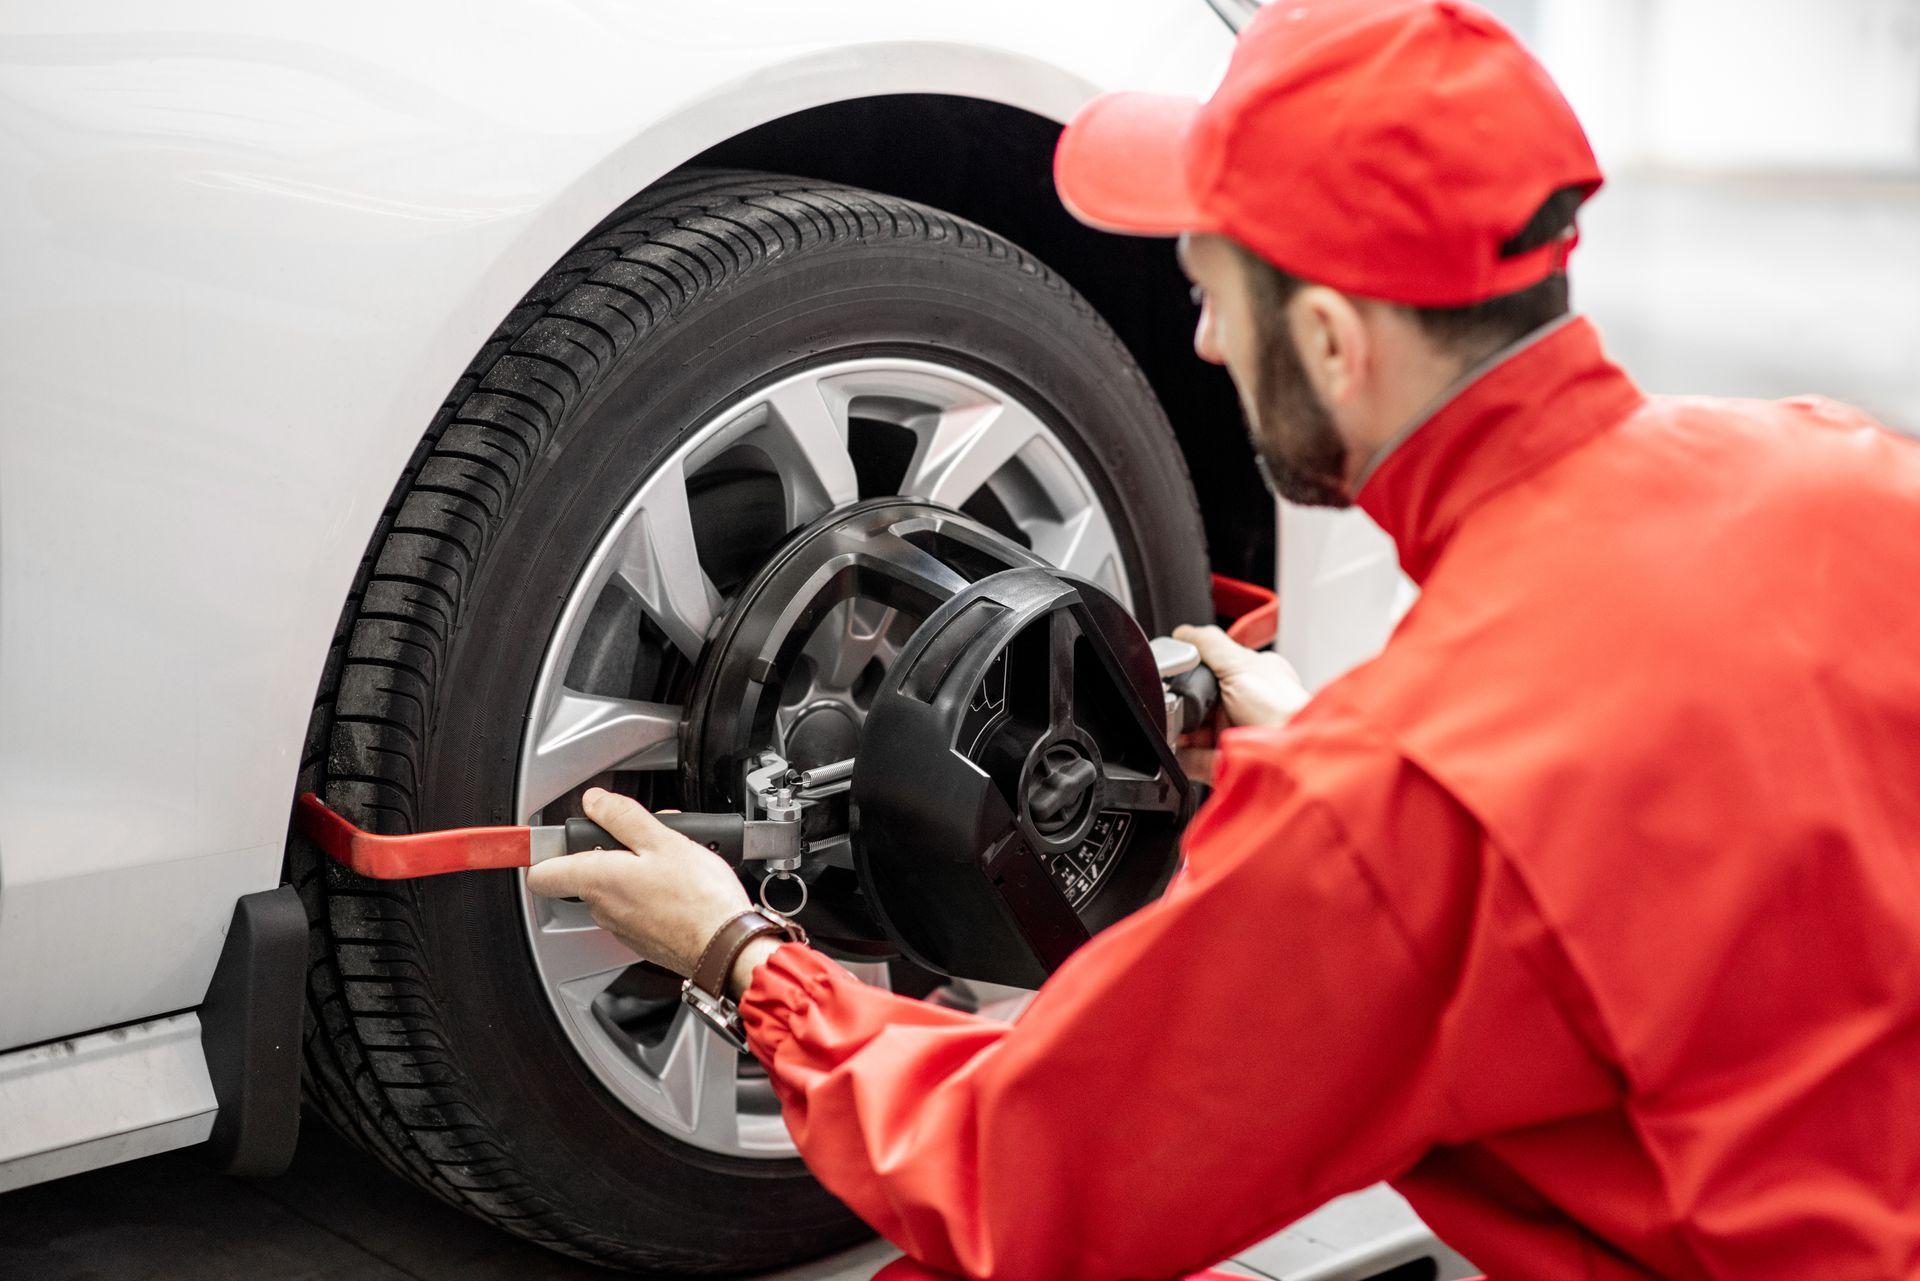 Wheel Alignments at ﻿RGV Tire Pros/Valvoline Express Care﻿ in ﻿Mission and Palmdale, TX﻿